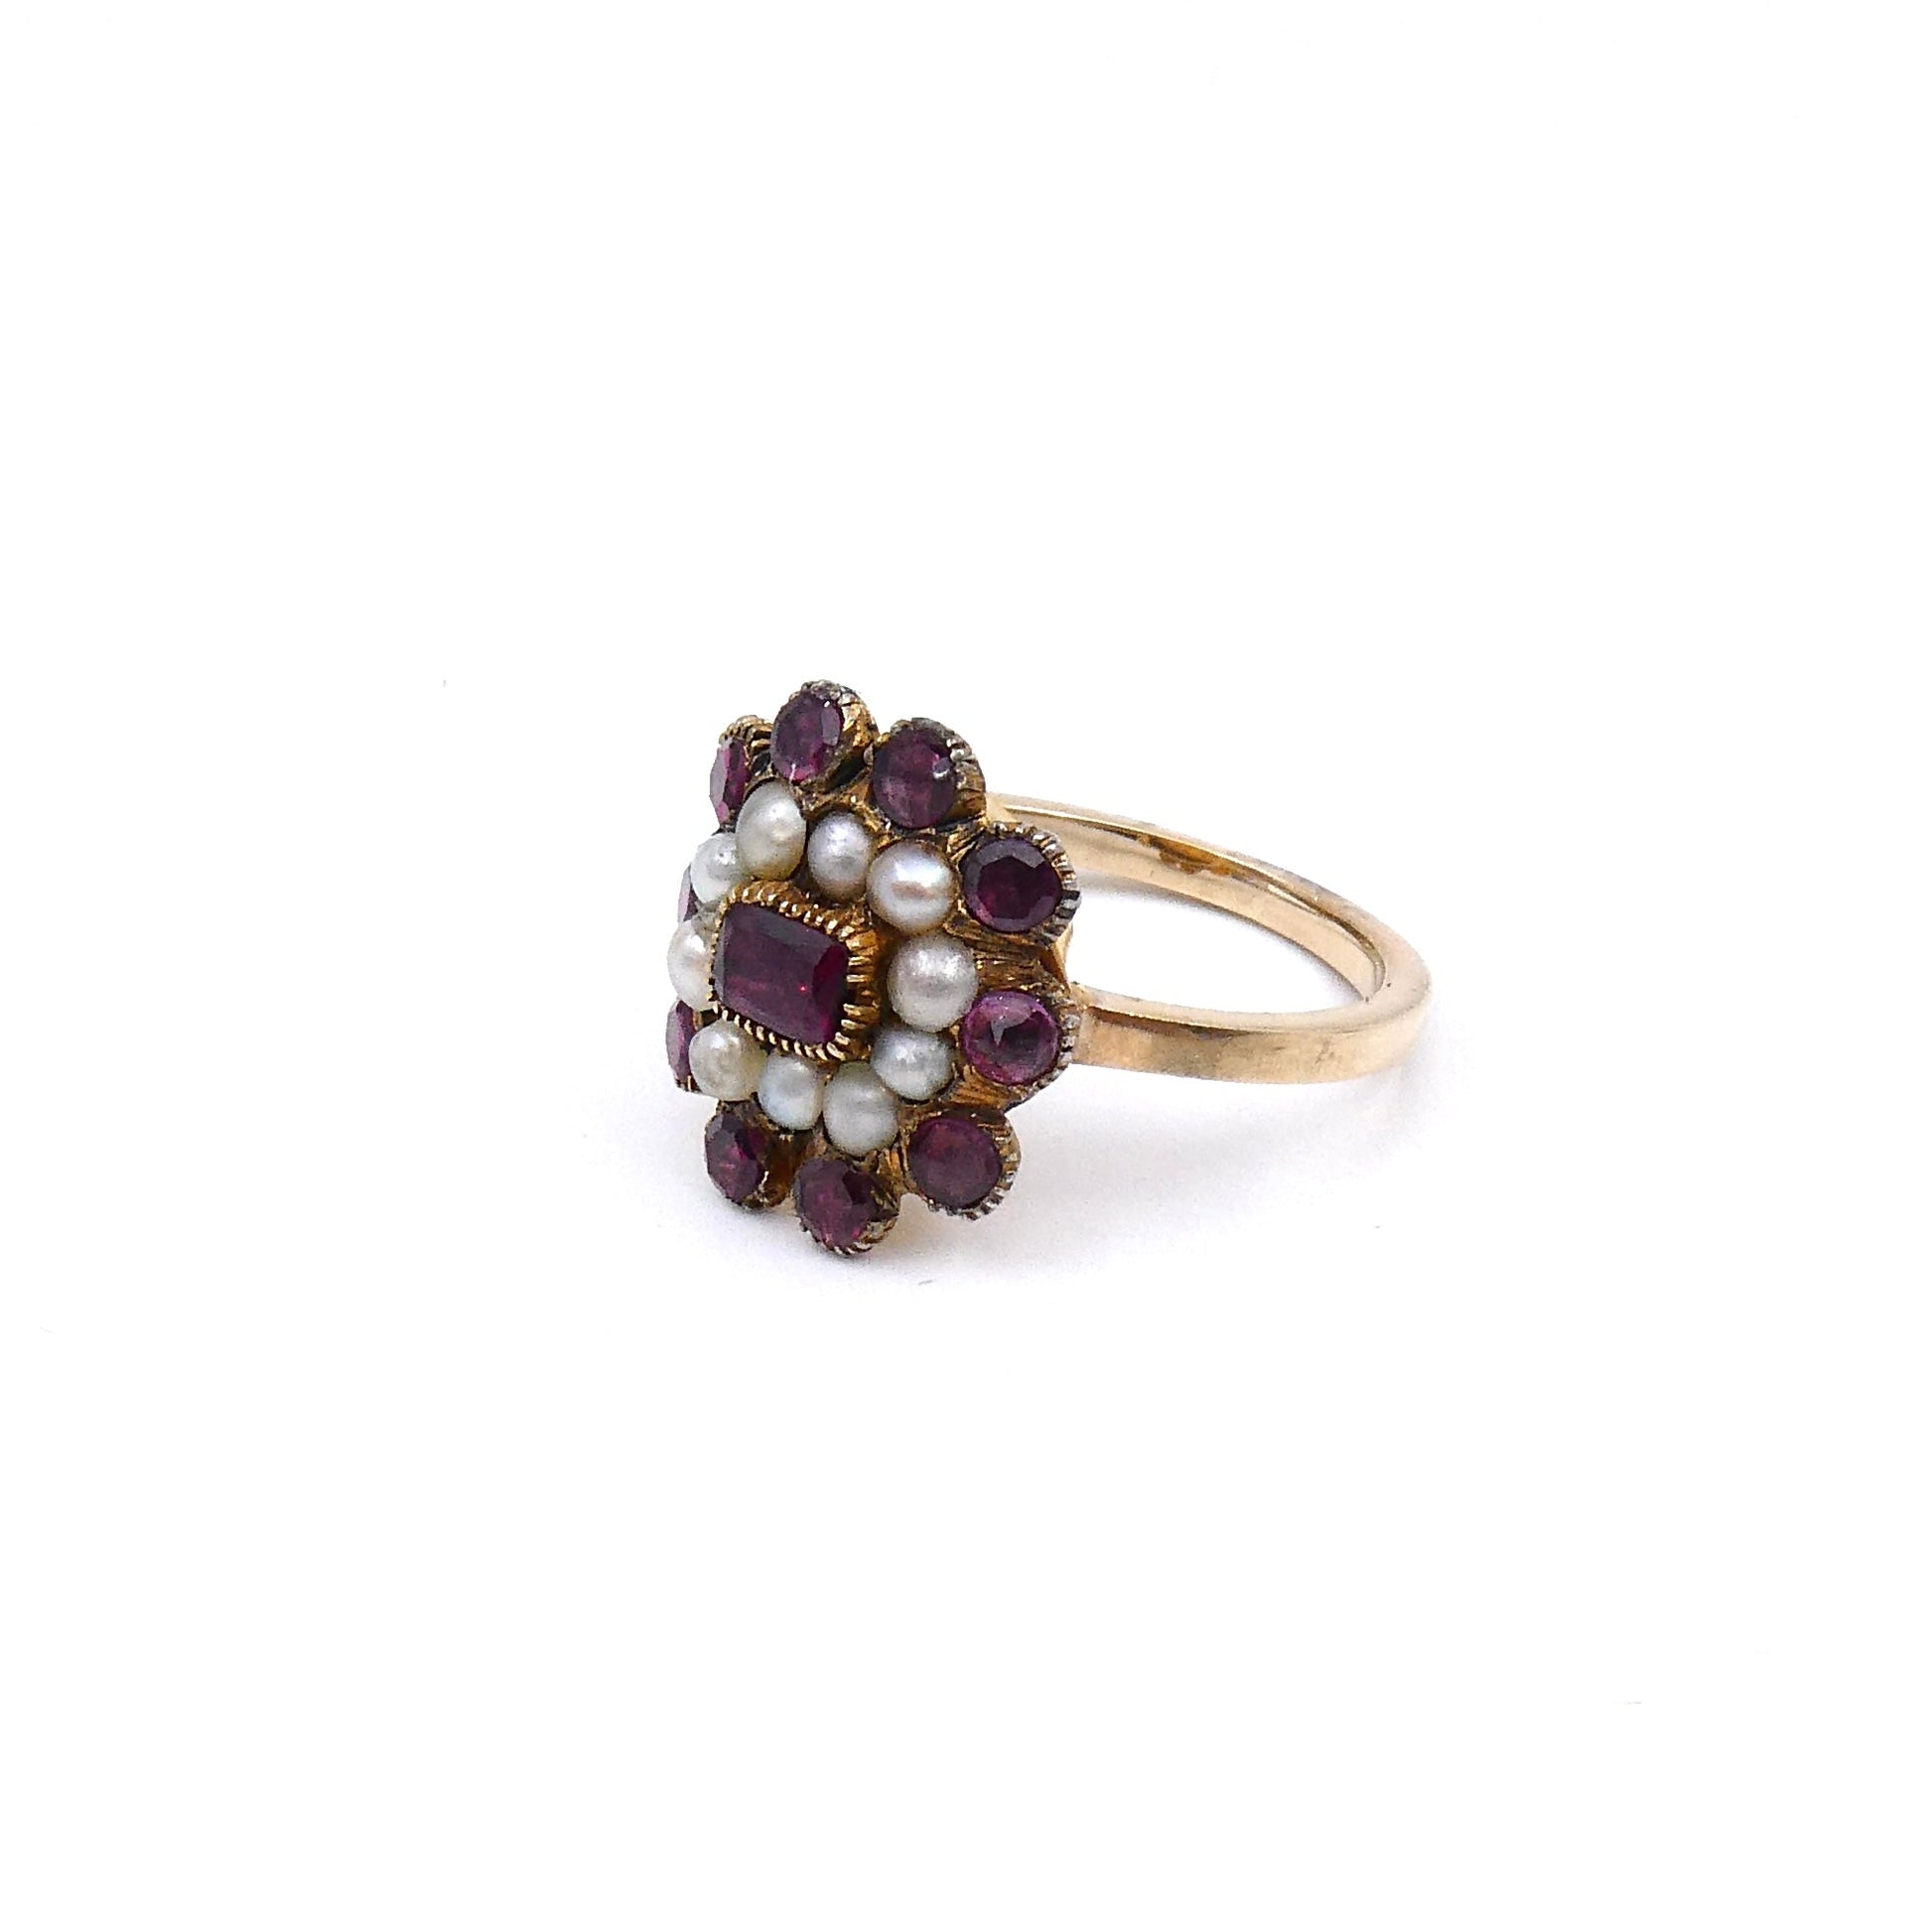 Antique garnet and pearl ring, unique ring converted from a Georgian brooch. - Collected